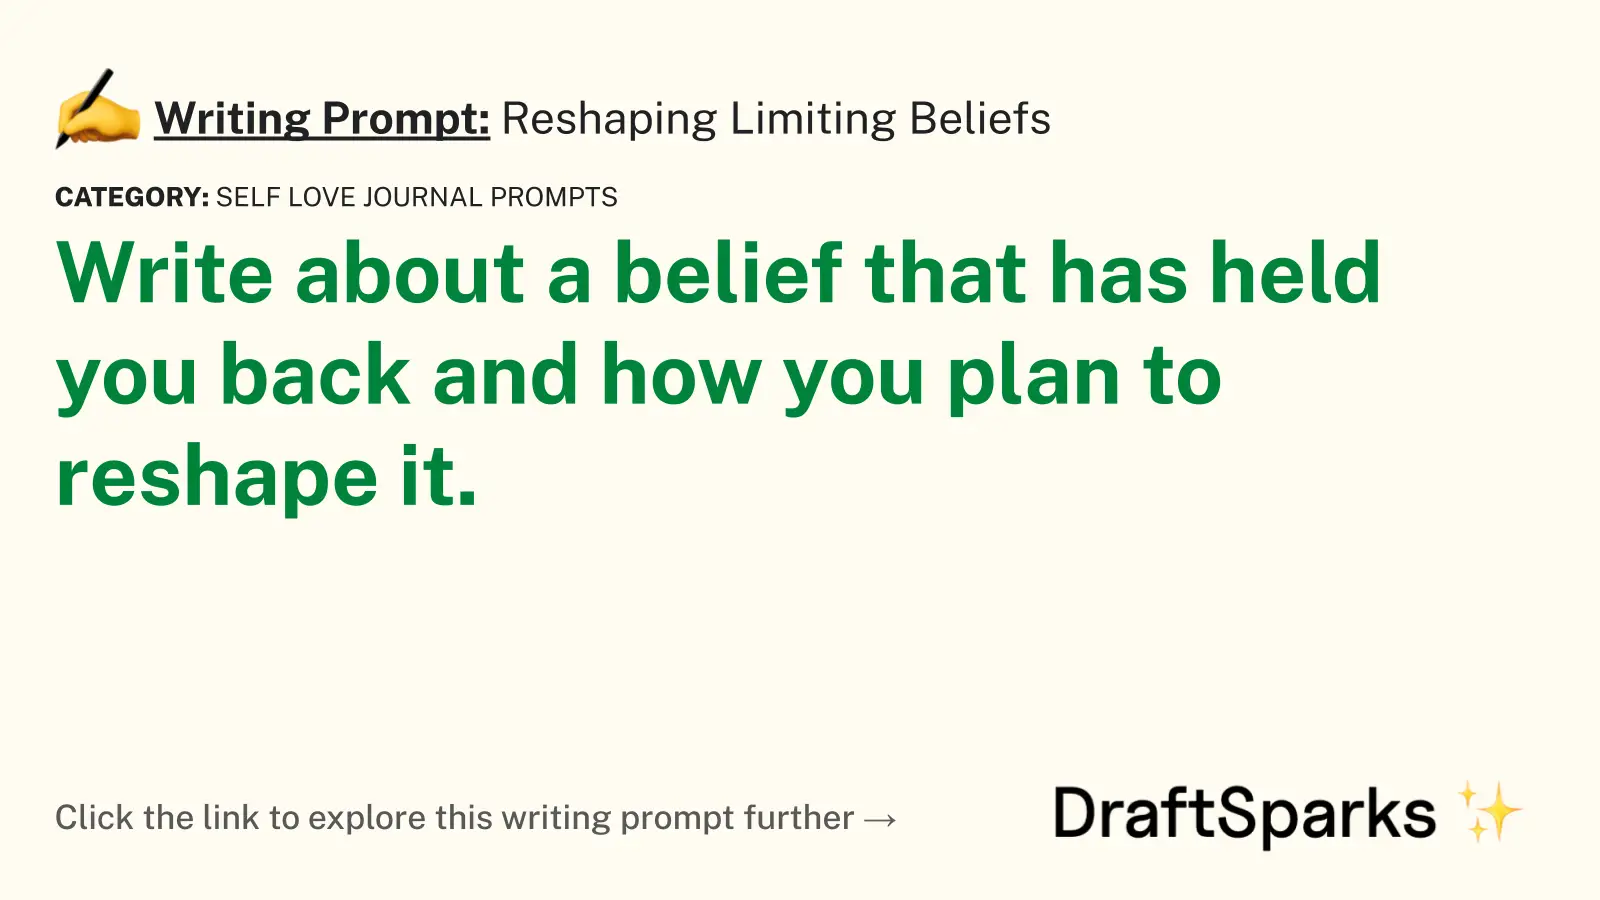 Reshaping Limiting Beliefs